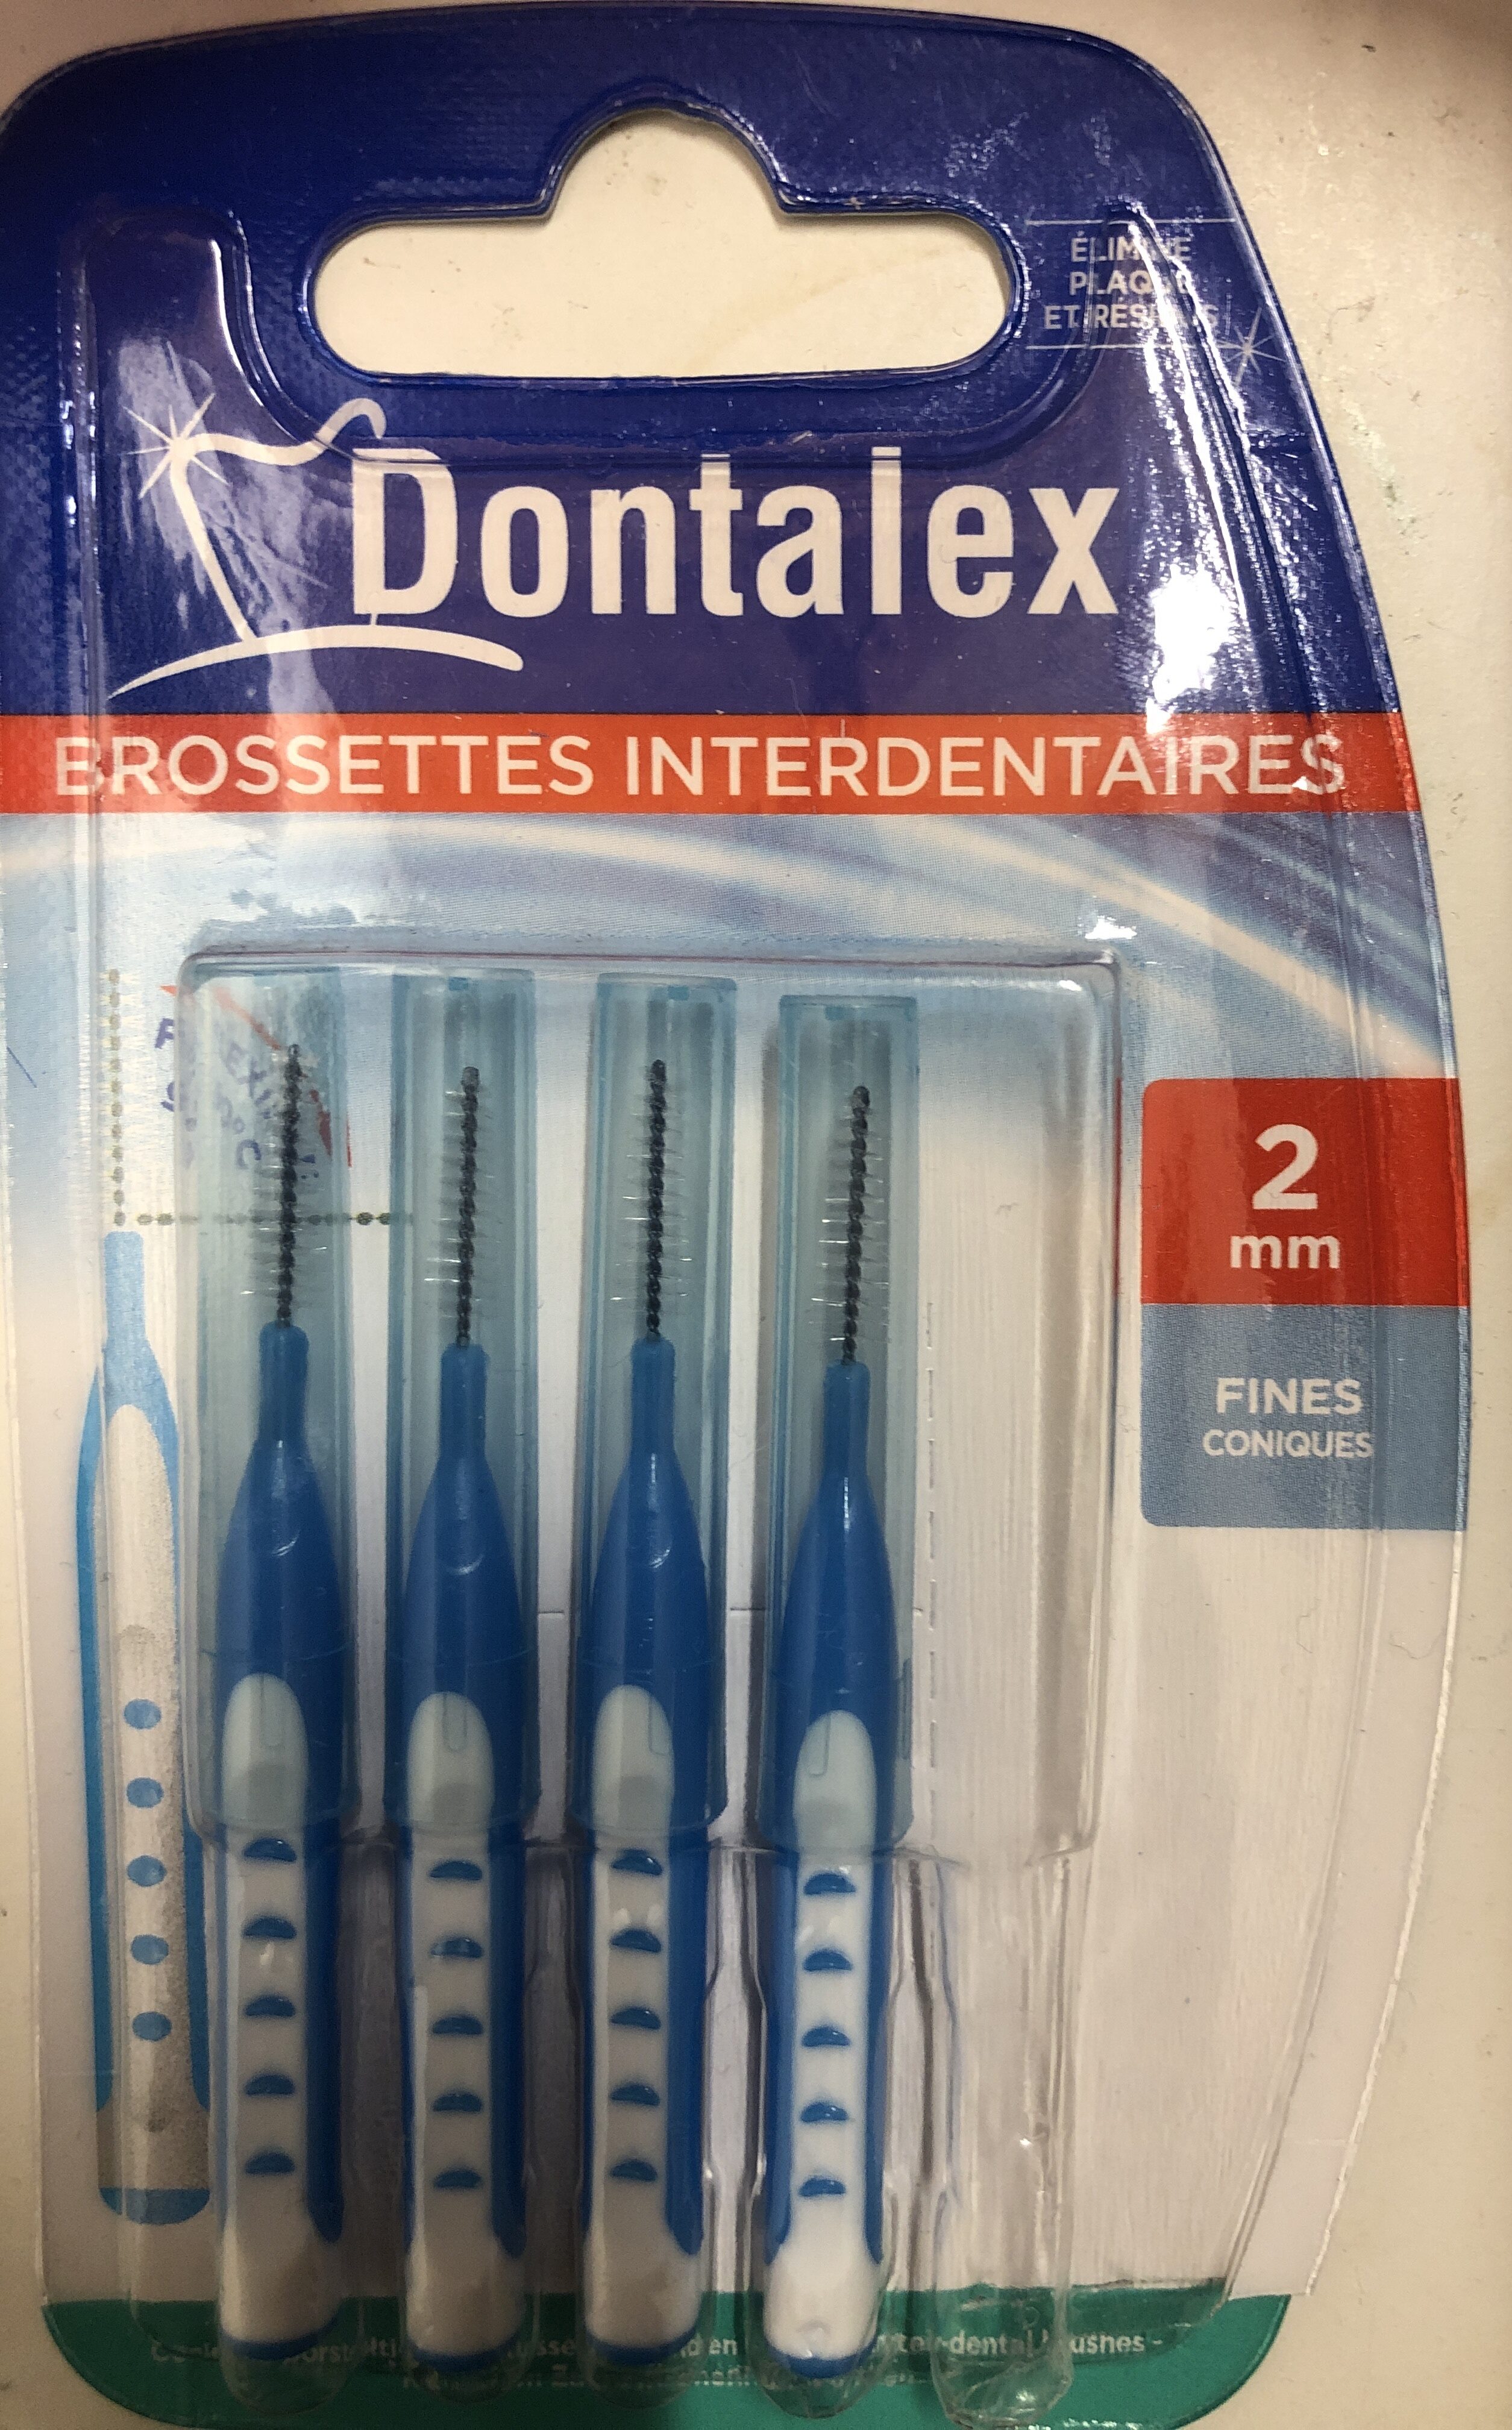 Brossettes interdentaires - Tuote - fr